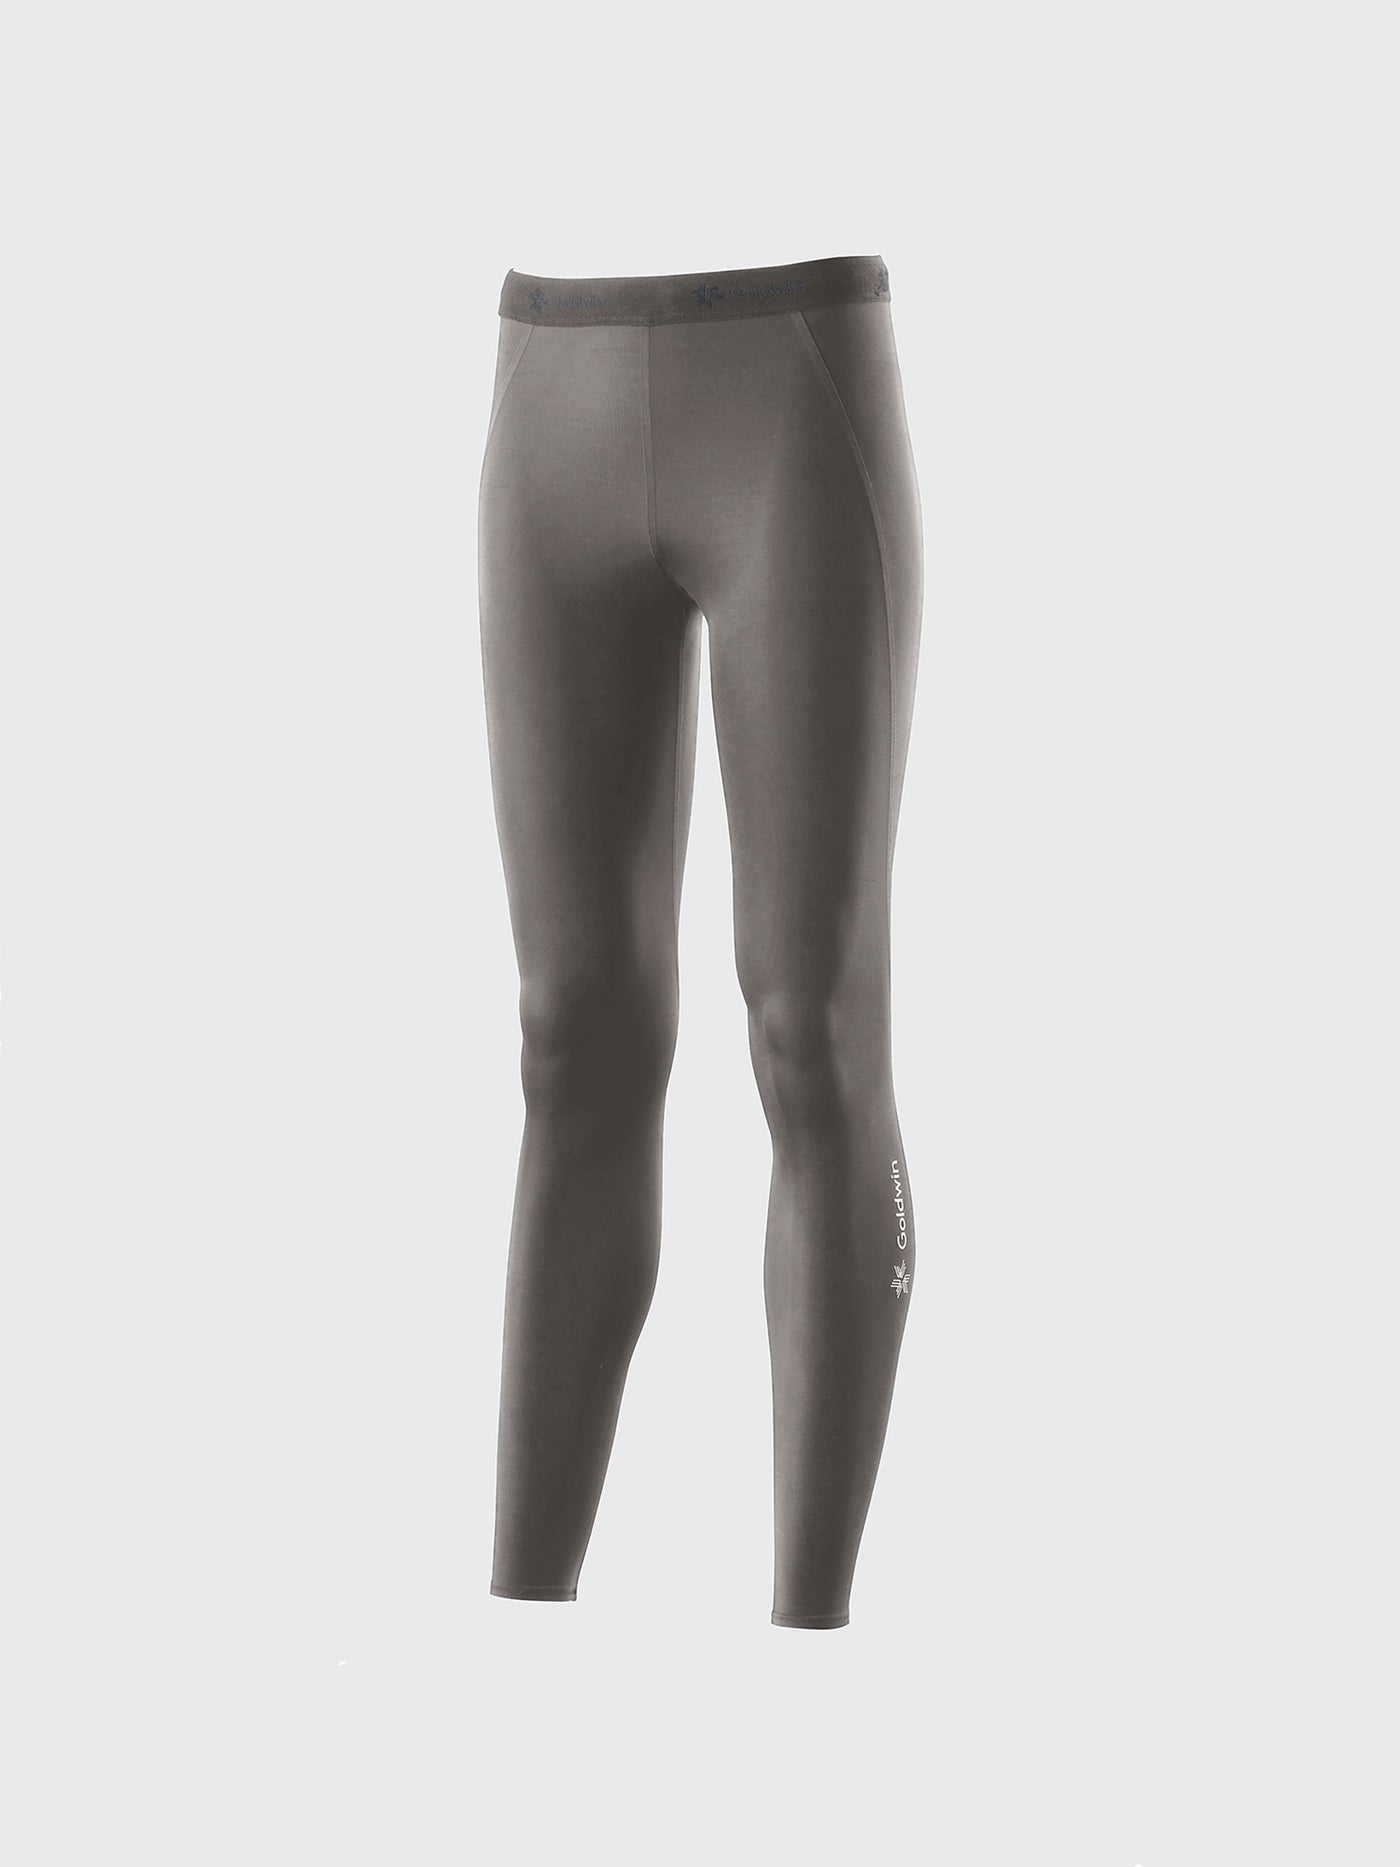 UNISEX PROTECTIVE AND RESISTANT 900 LONG RUNNING TIGHTS FOR